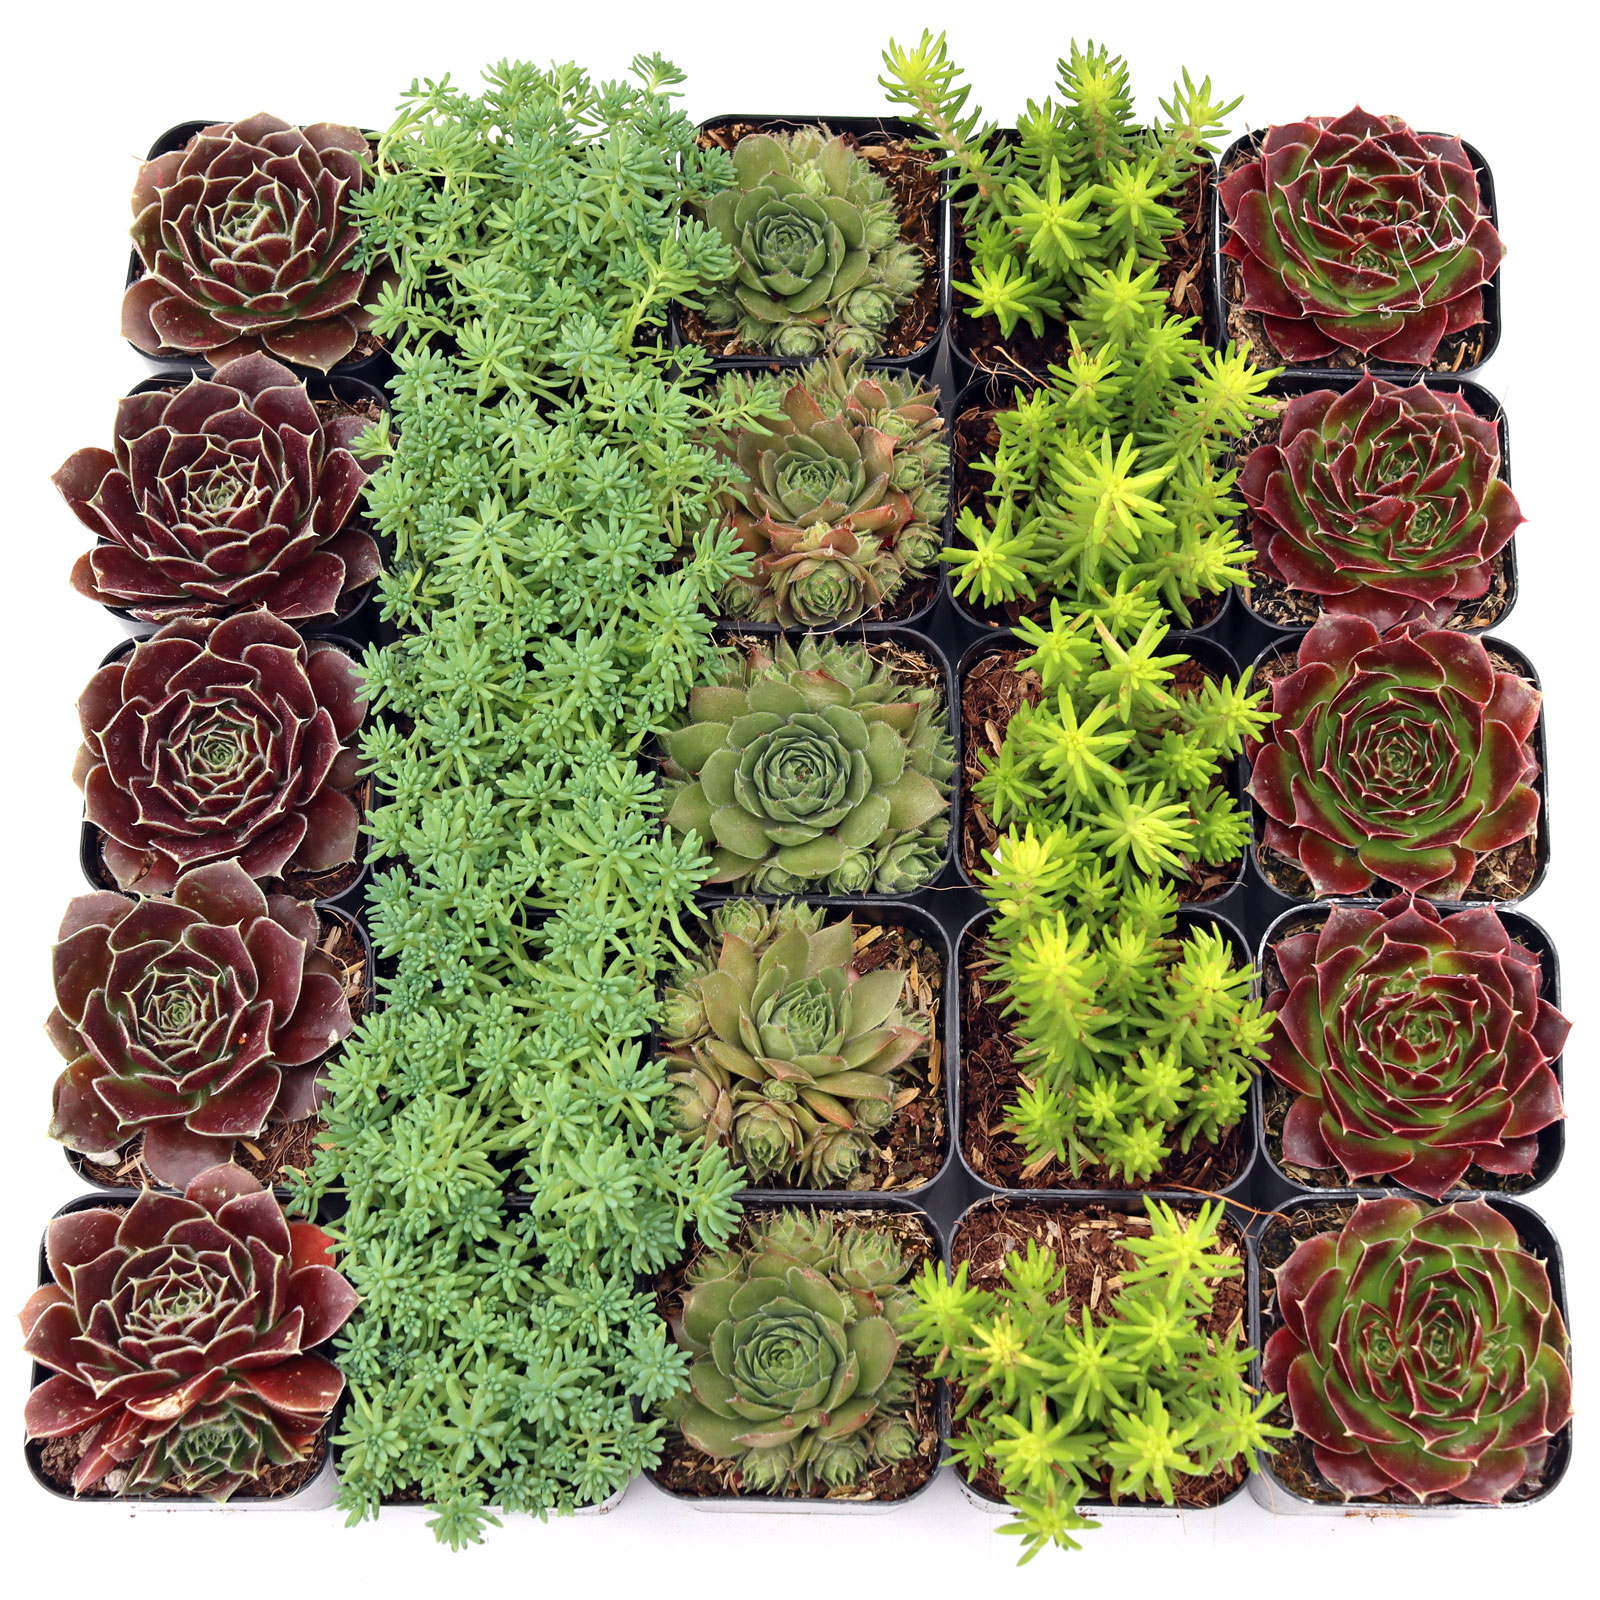 MCG Hardy Outdoors™ 25 Bulk Succulents - 5 Types w/ ID - 2in Pots Questions & Answers